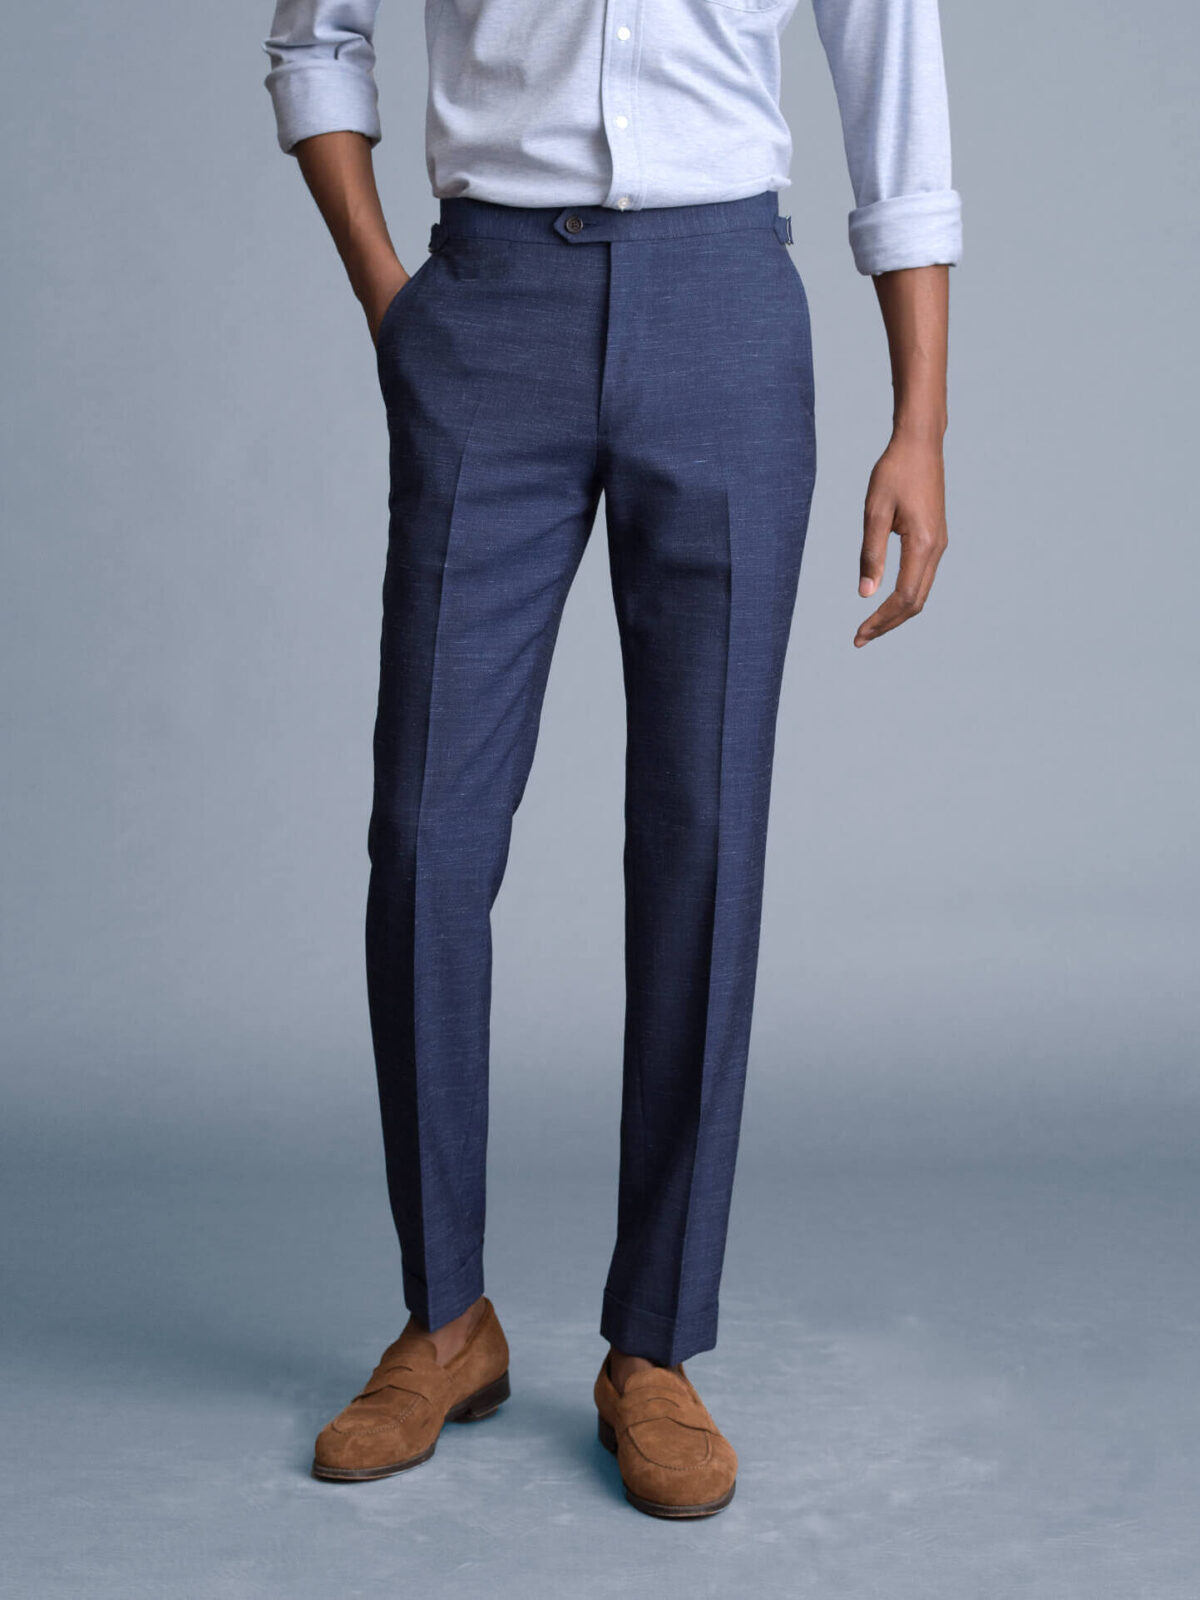 Navy Cotton and Linen Dress Pant